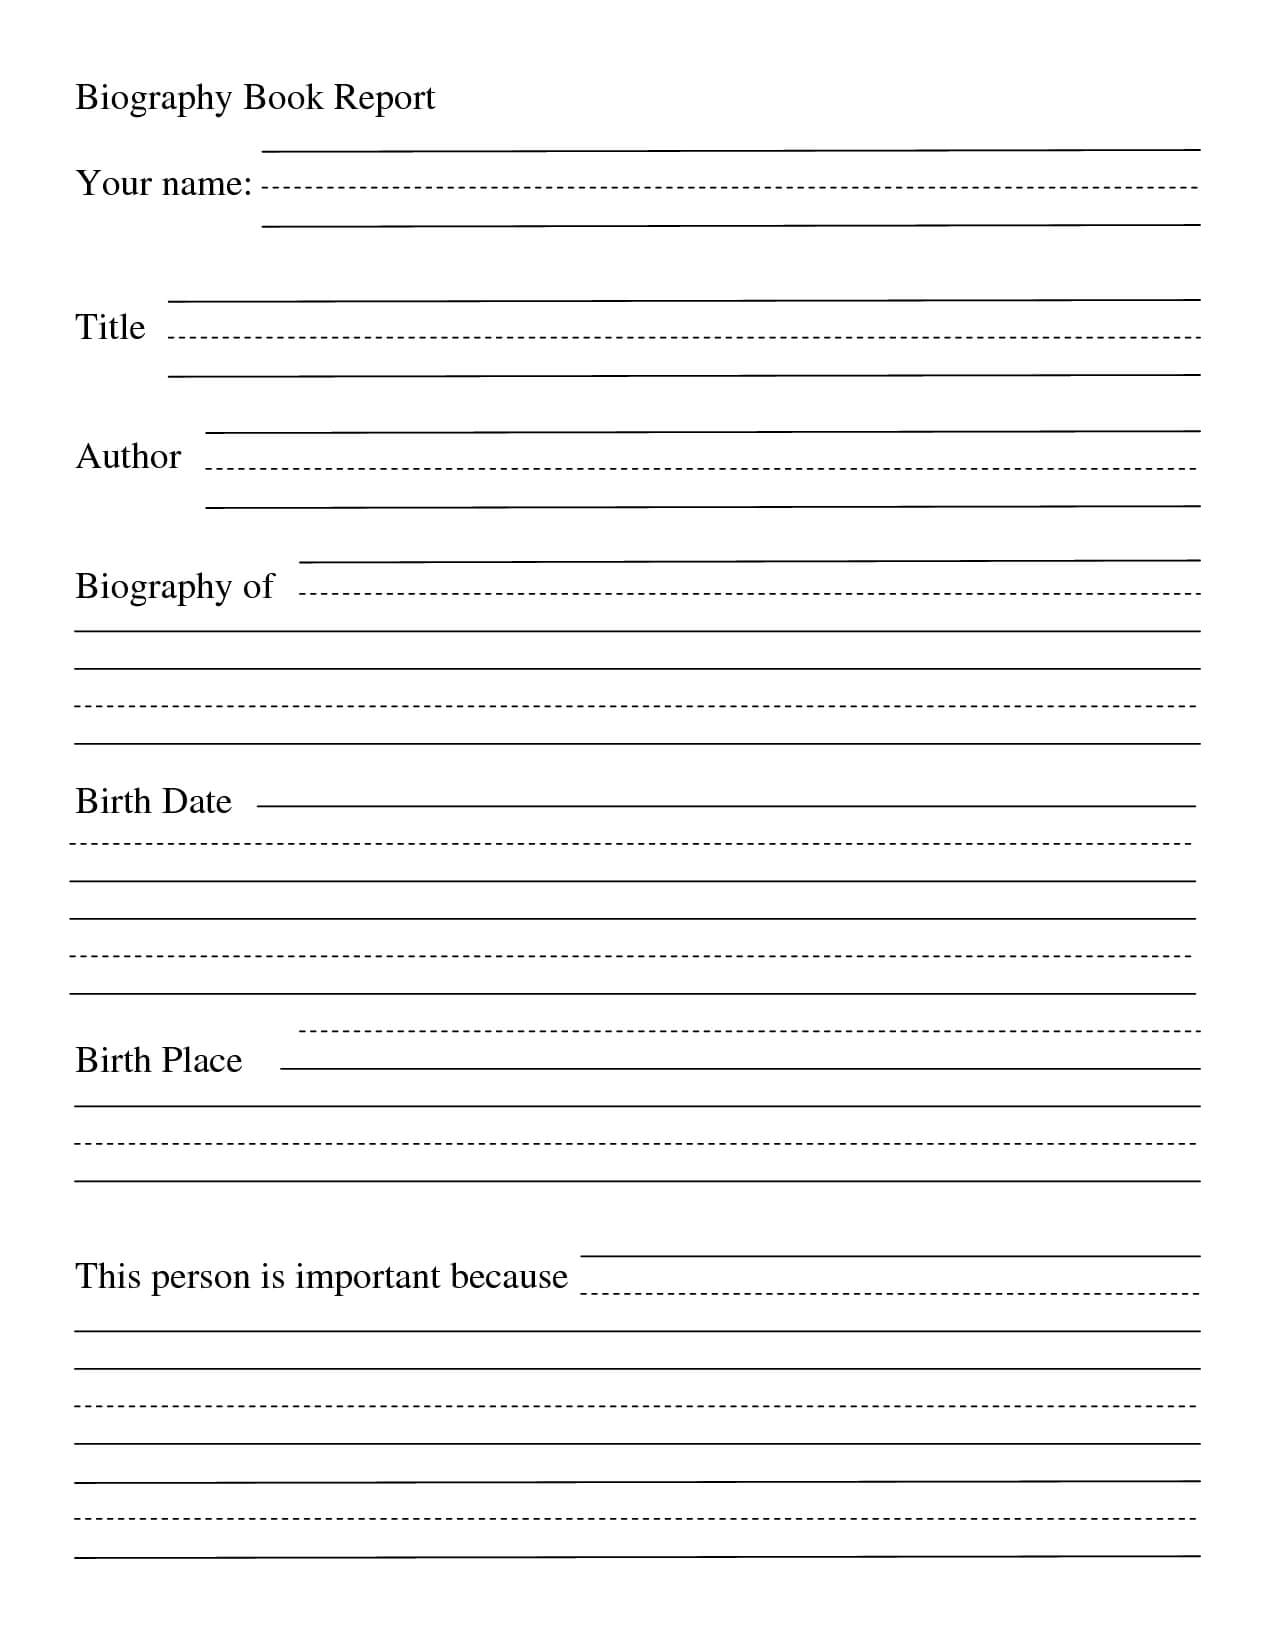 004 Biography Book Report Template Formidable Ideas Pdf High With Regard To High School Book Report Template